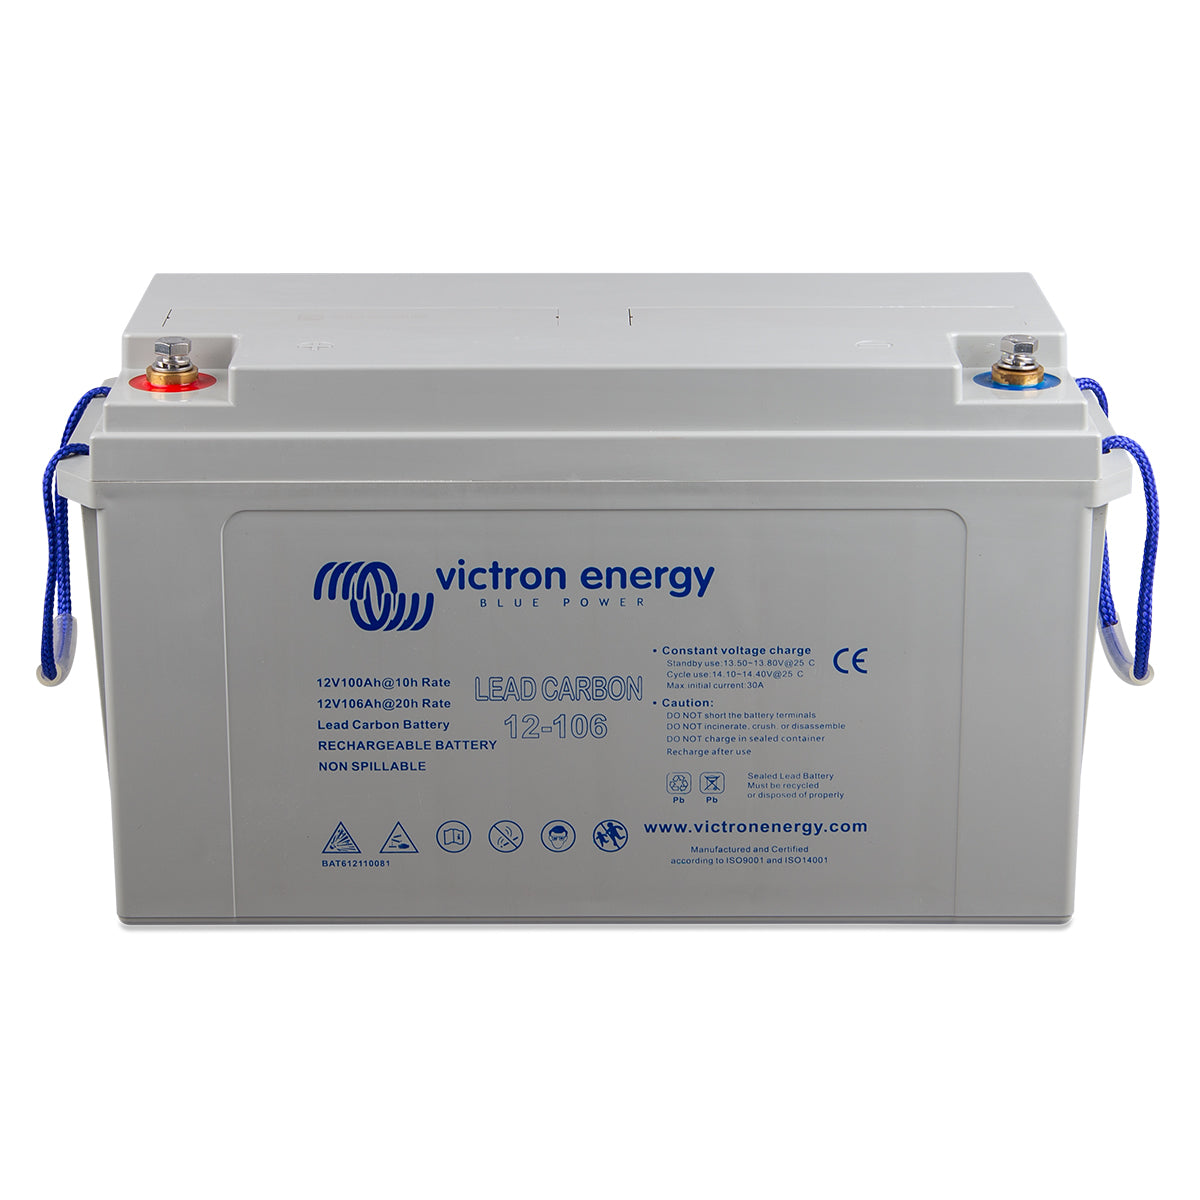 Victron Energy 12V/106Ah Lead Carbon Battery